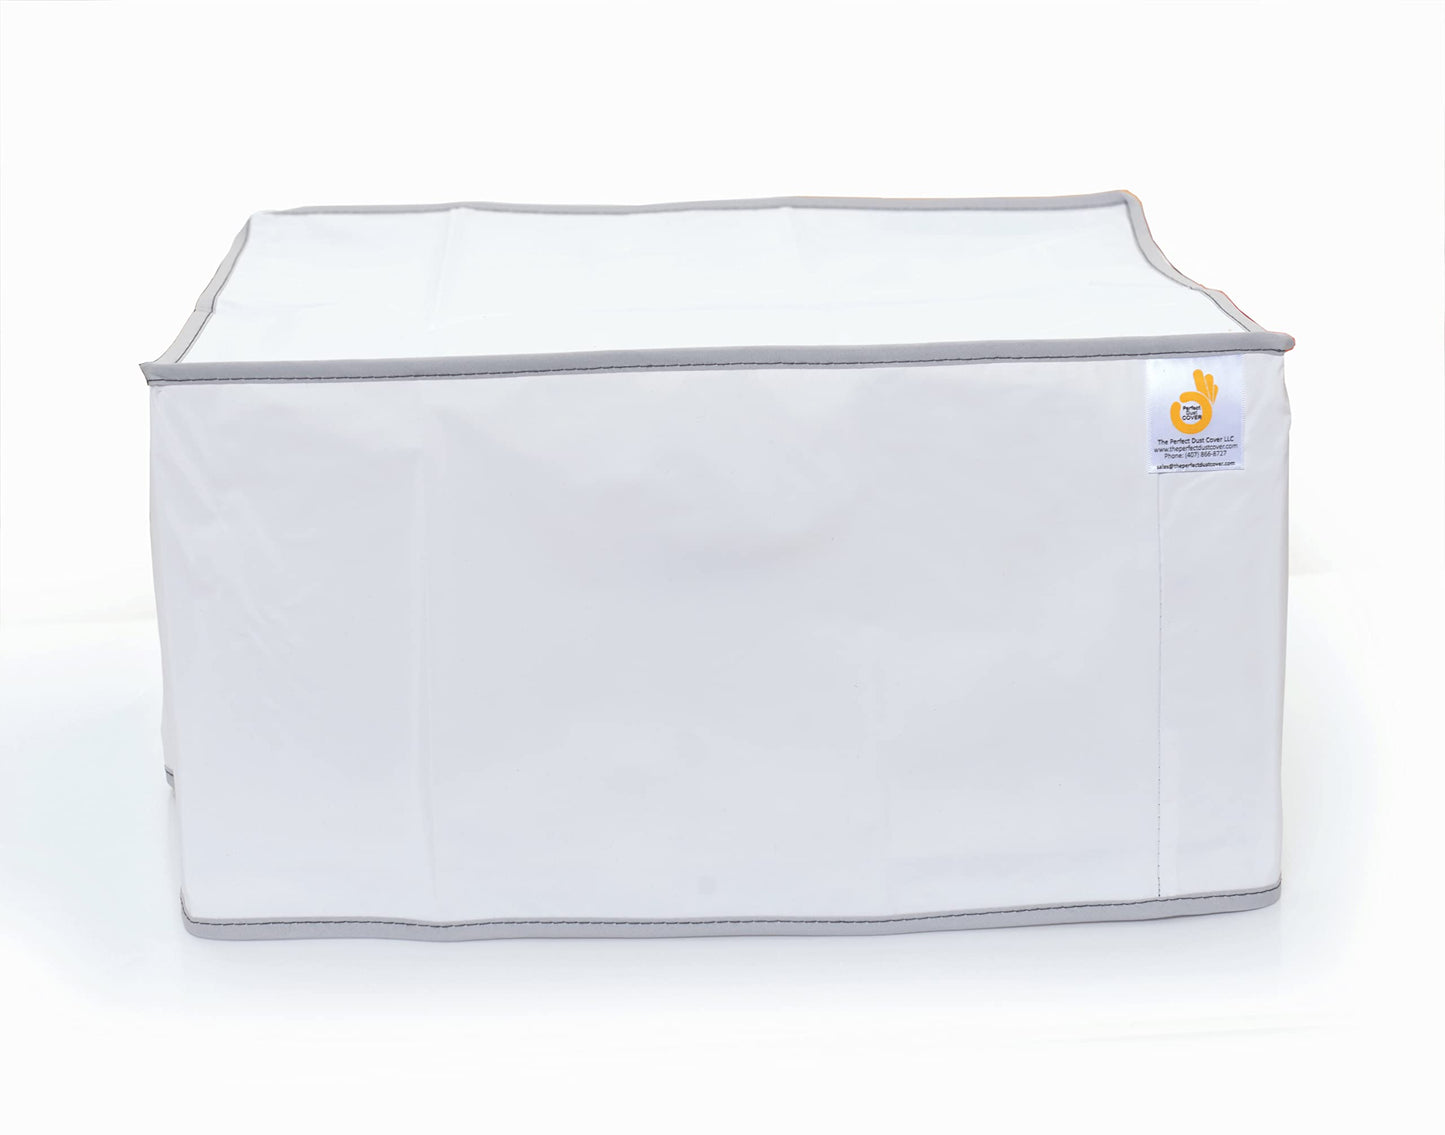 The Perfect Dust Cover, White Nylon Cover Compatible with HP LaserJet Pro MFP M234sdwe Laser Printer, Anti Static and Waterproof Dust Cover by The Perfect Dust Cover LLC